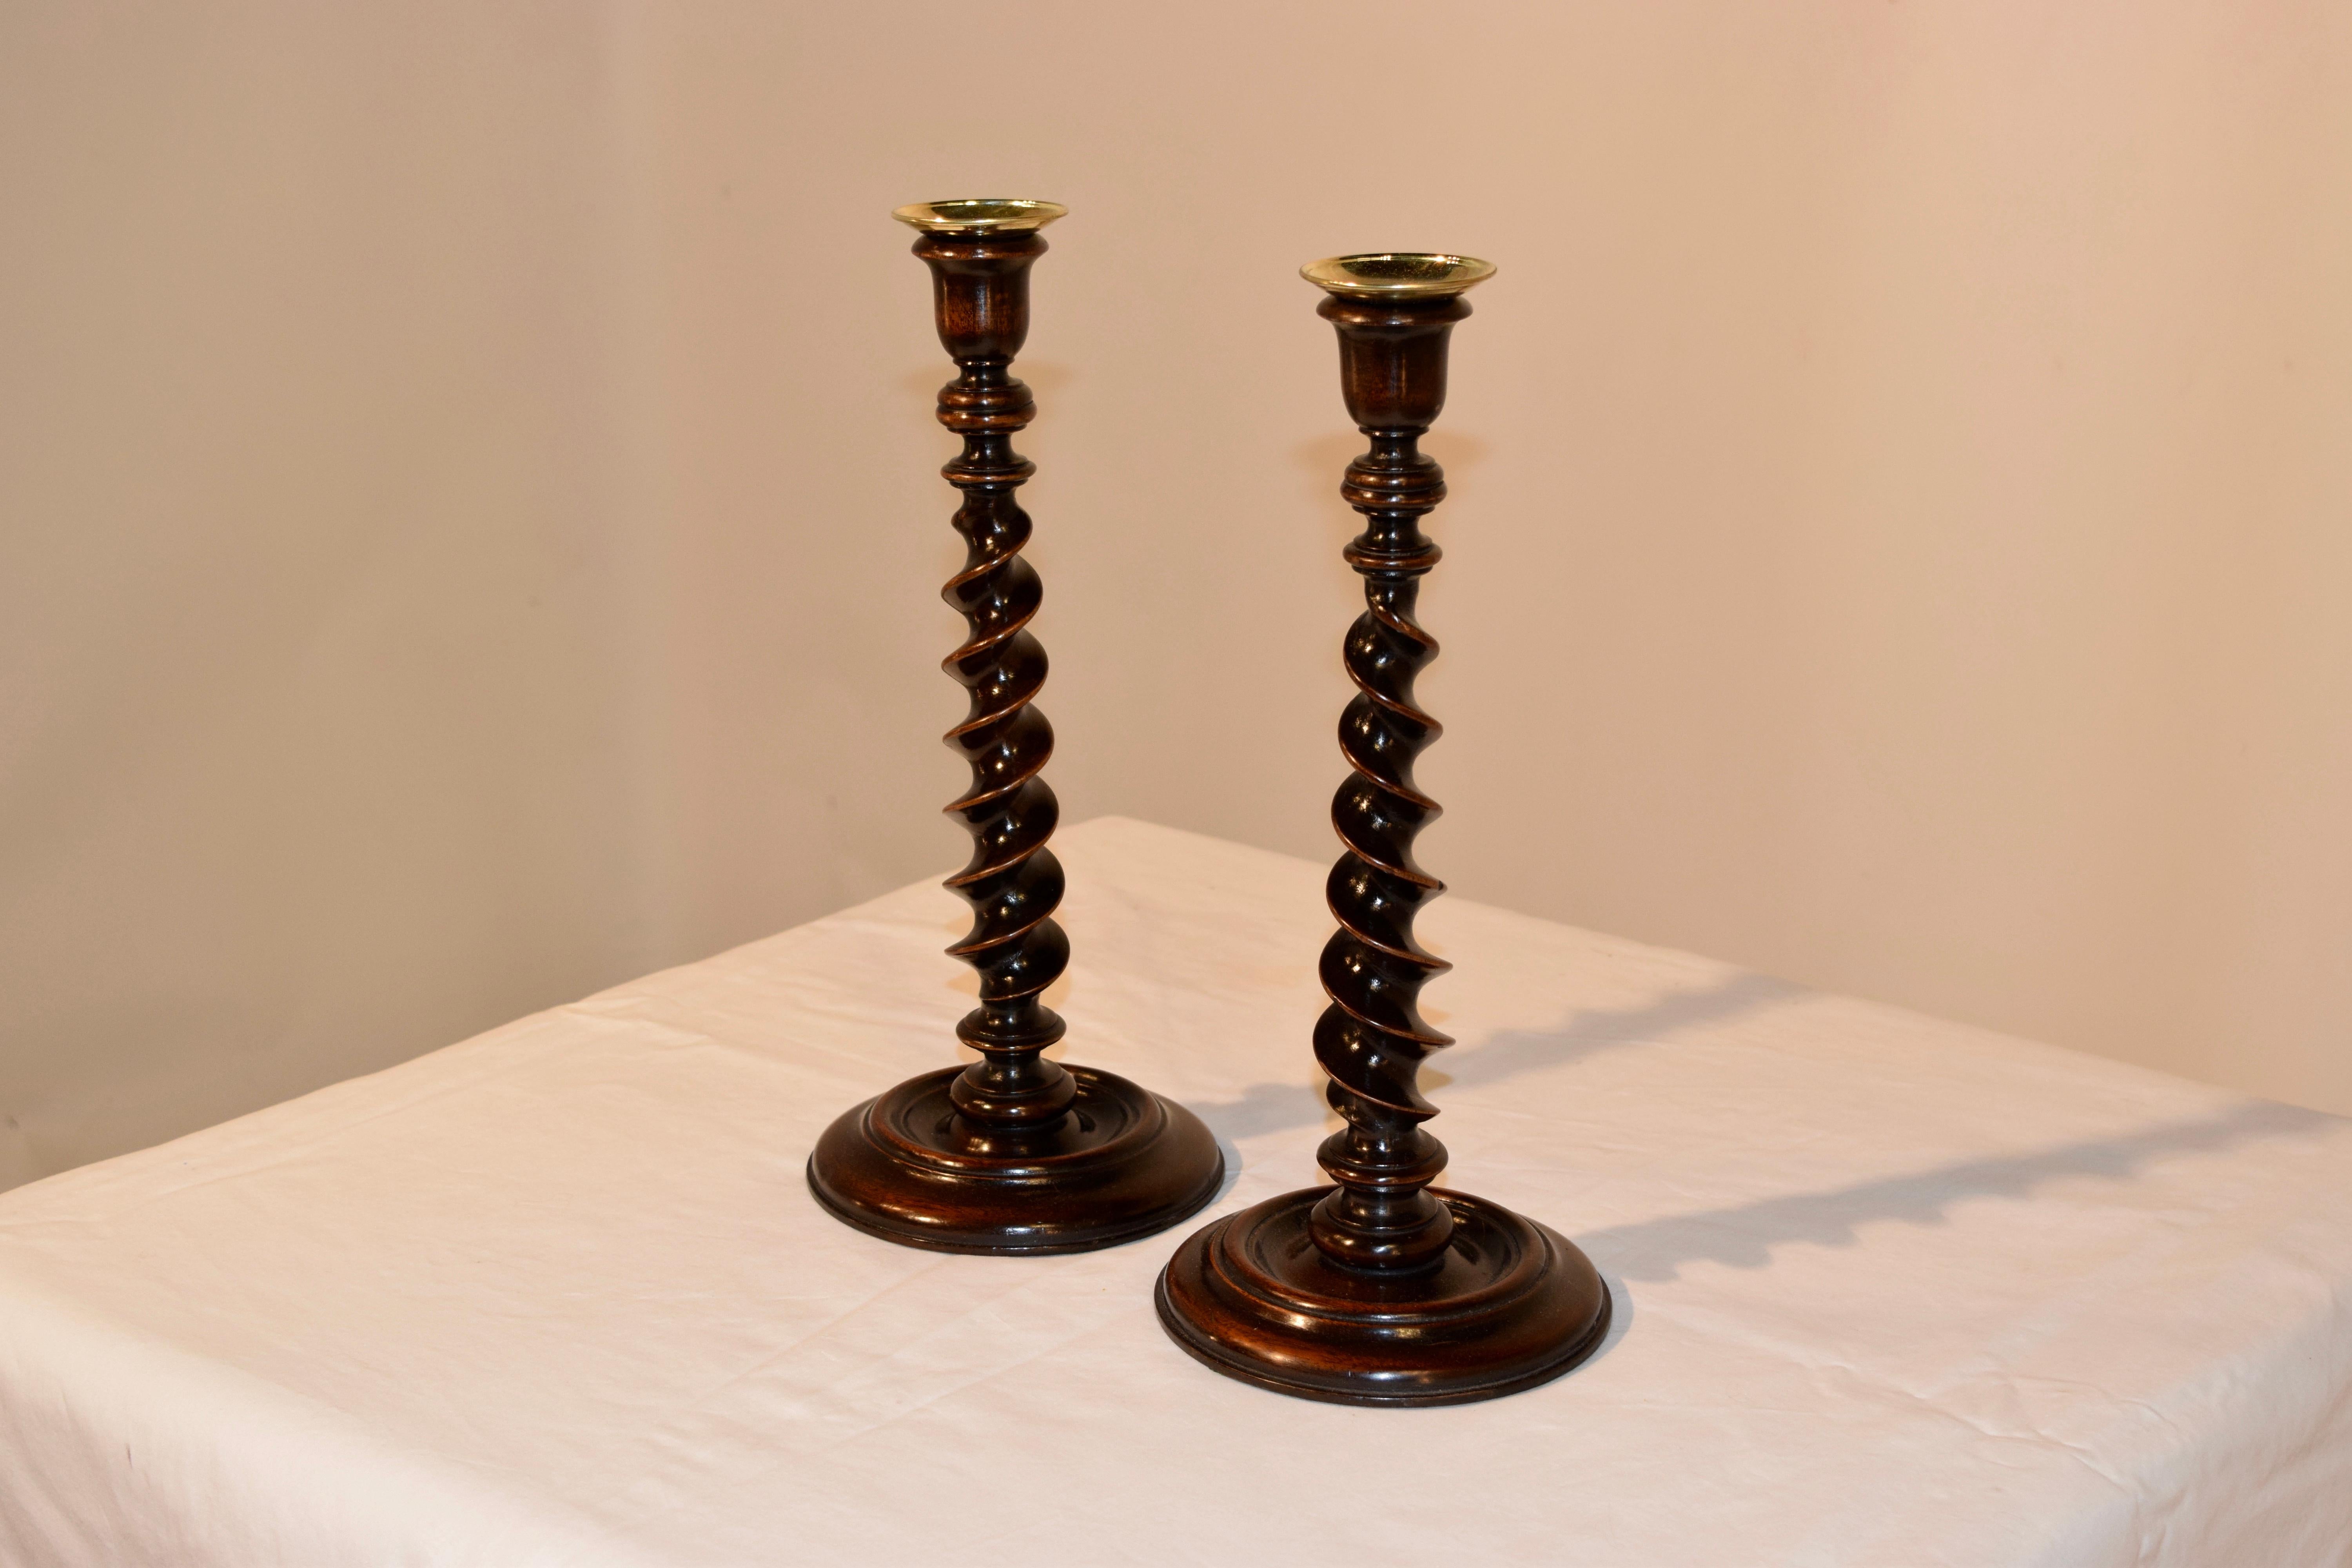 Very unusual pair of 19th century oak candlesticks made from mahogany. The candle cups are hand-turned in a tulip shape and are supported on wonderfully hand-turned ribbon twist stems and hand-turned bases. Ribbon twist is a very unusual and Fine